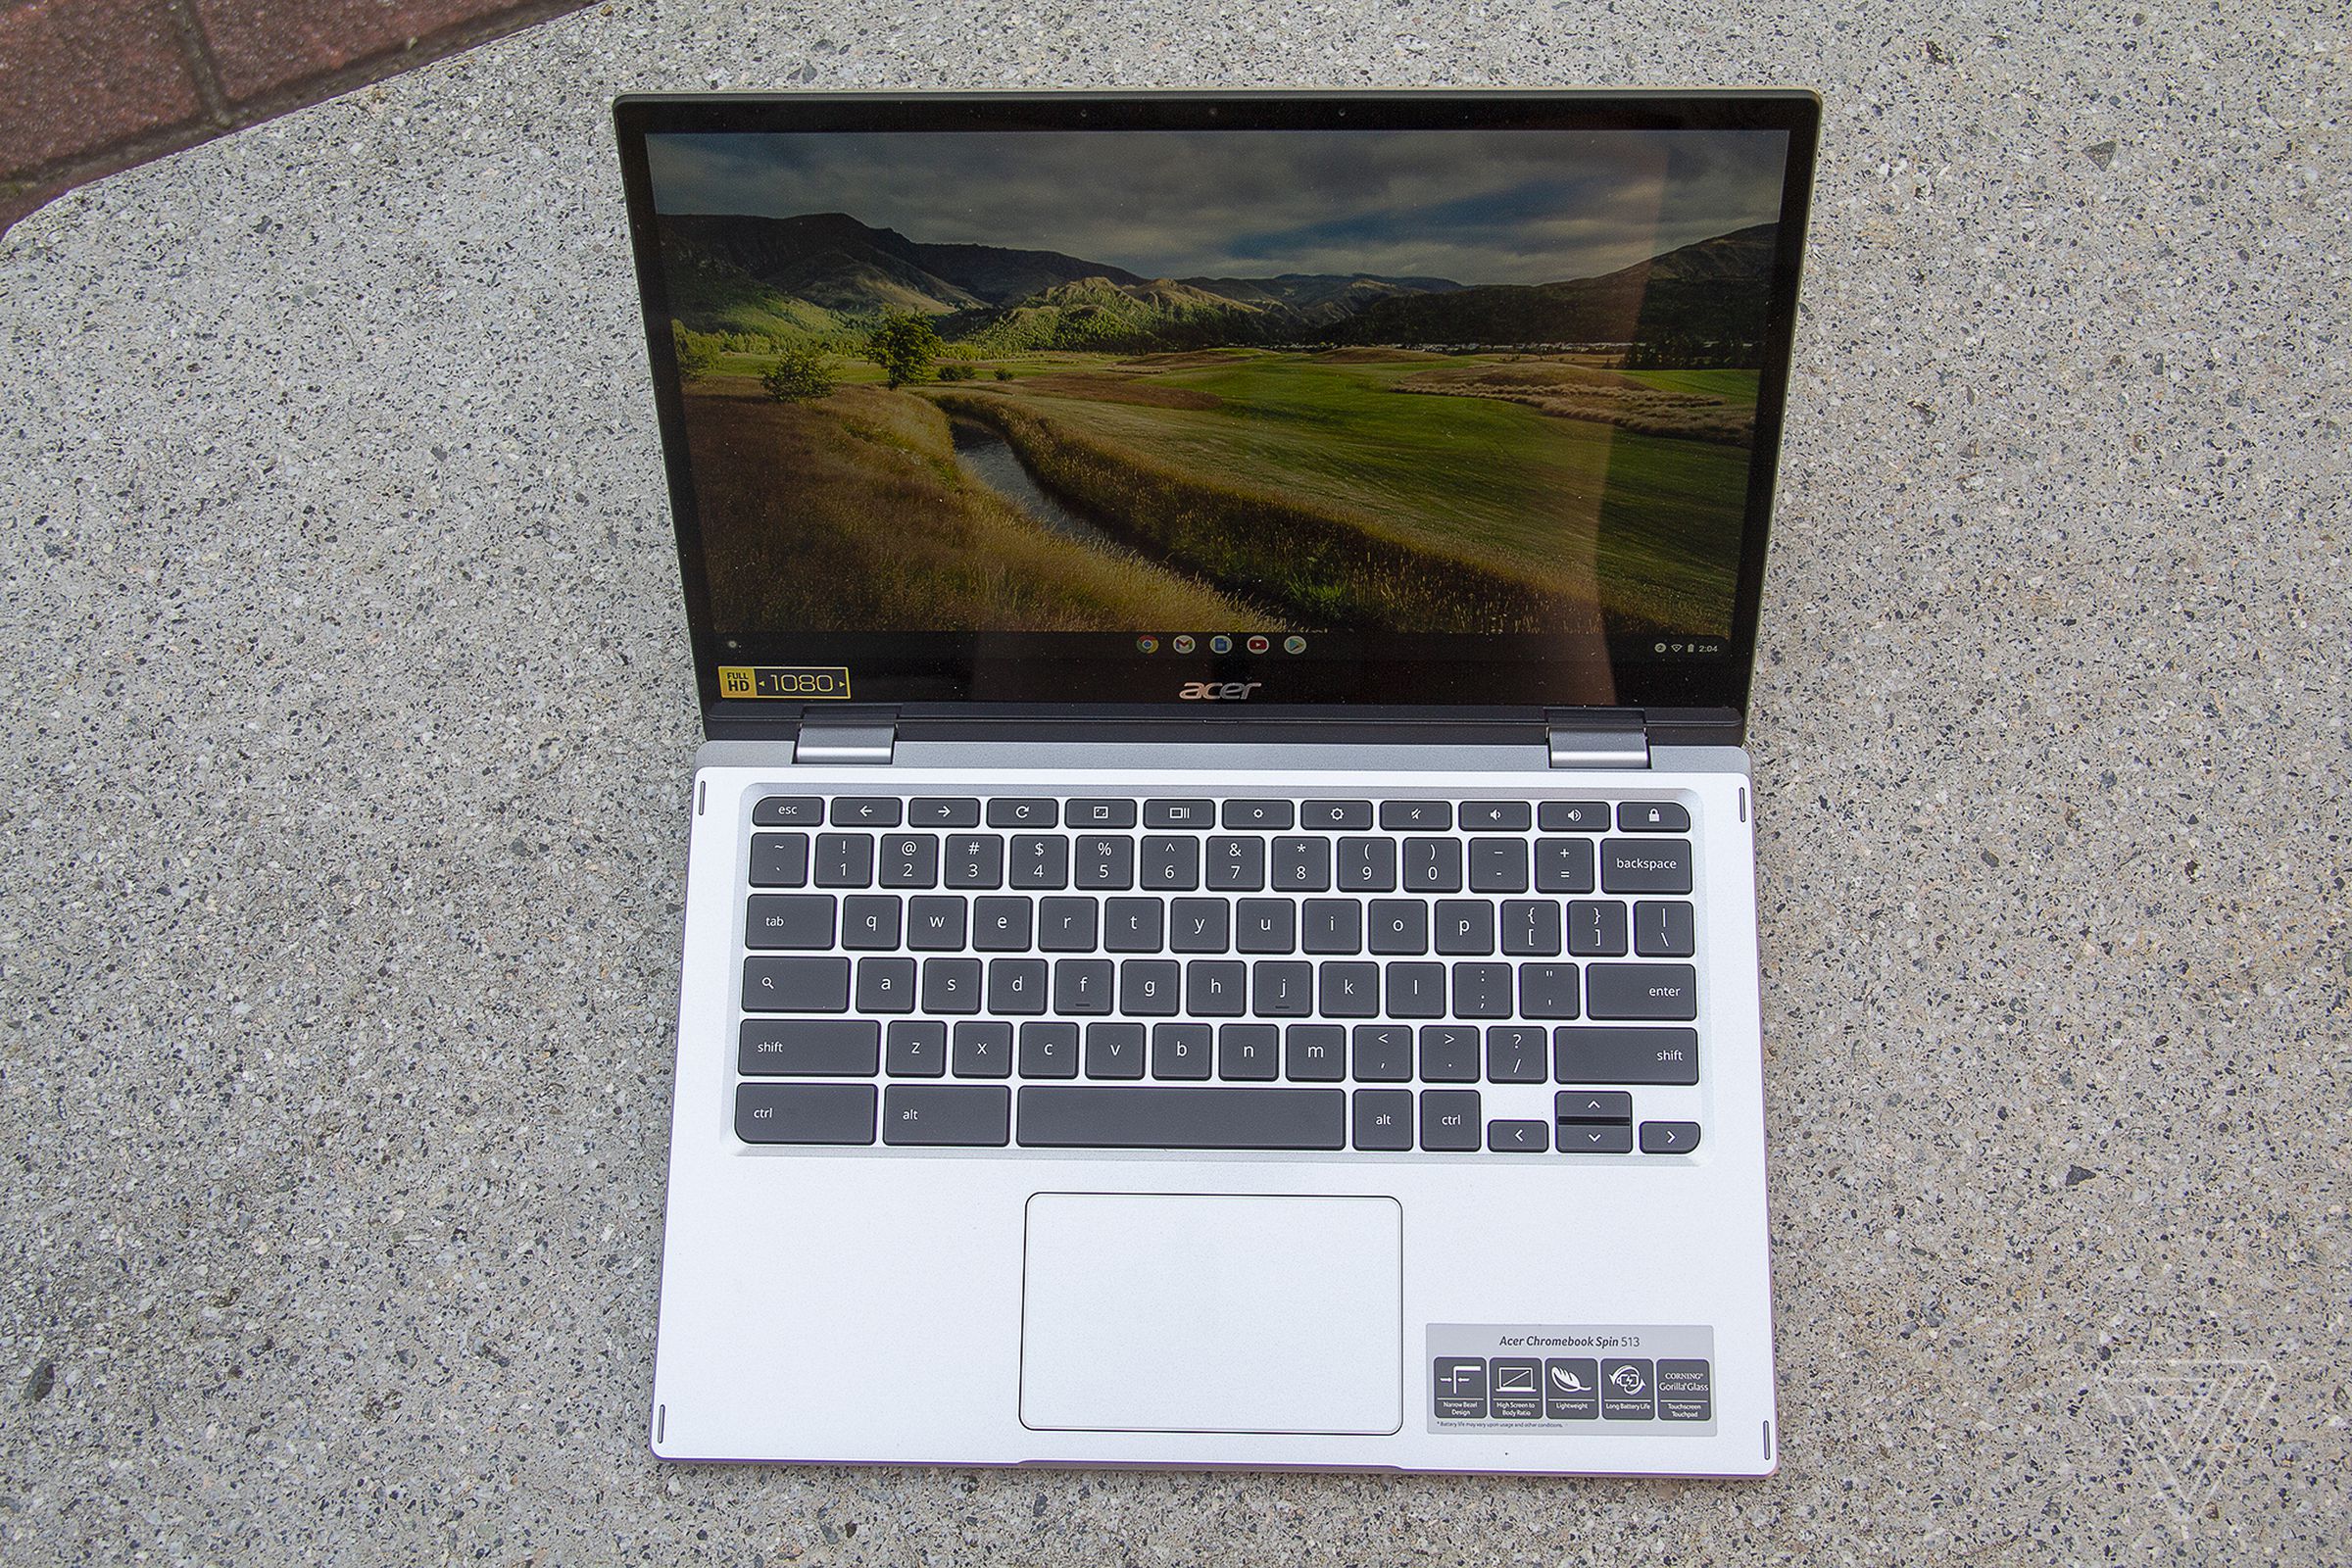 The Acer Chromebook Spin 513 on a stone bench, seen from above, open. The screen displays a pastoral landscape.